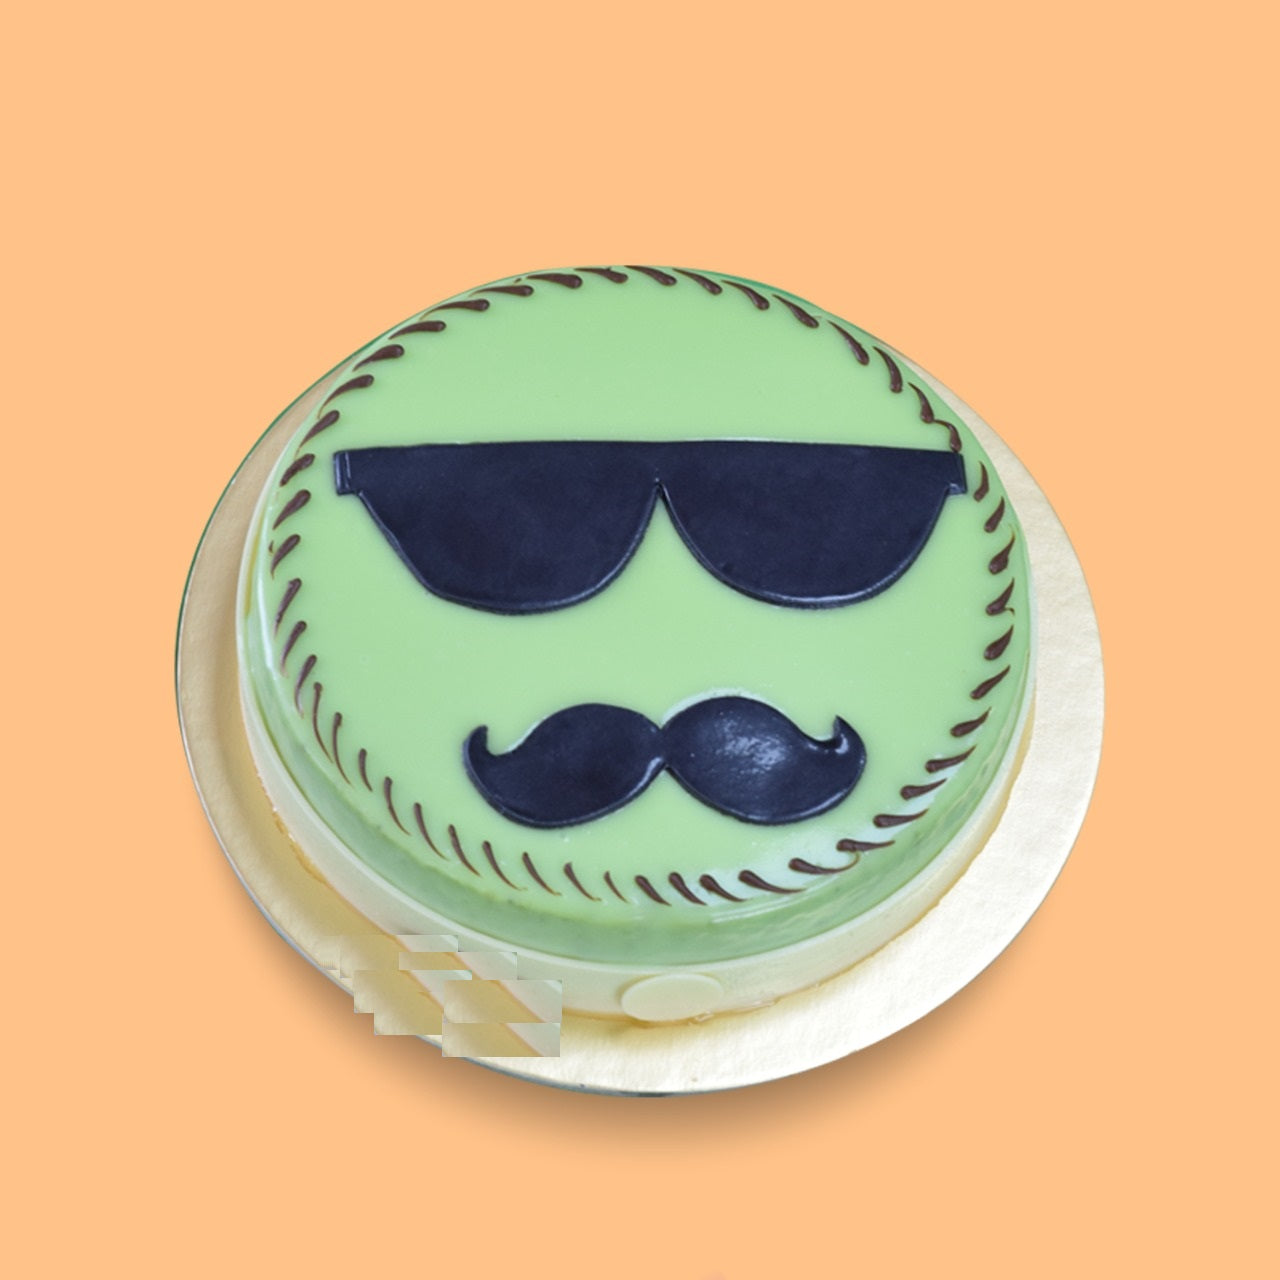 FATHER DAY cake, glasses and mustache cakes (6751549423780)